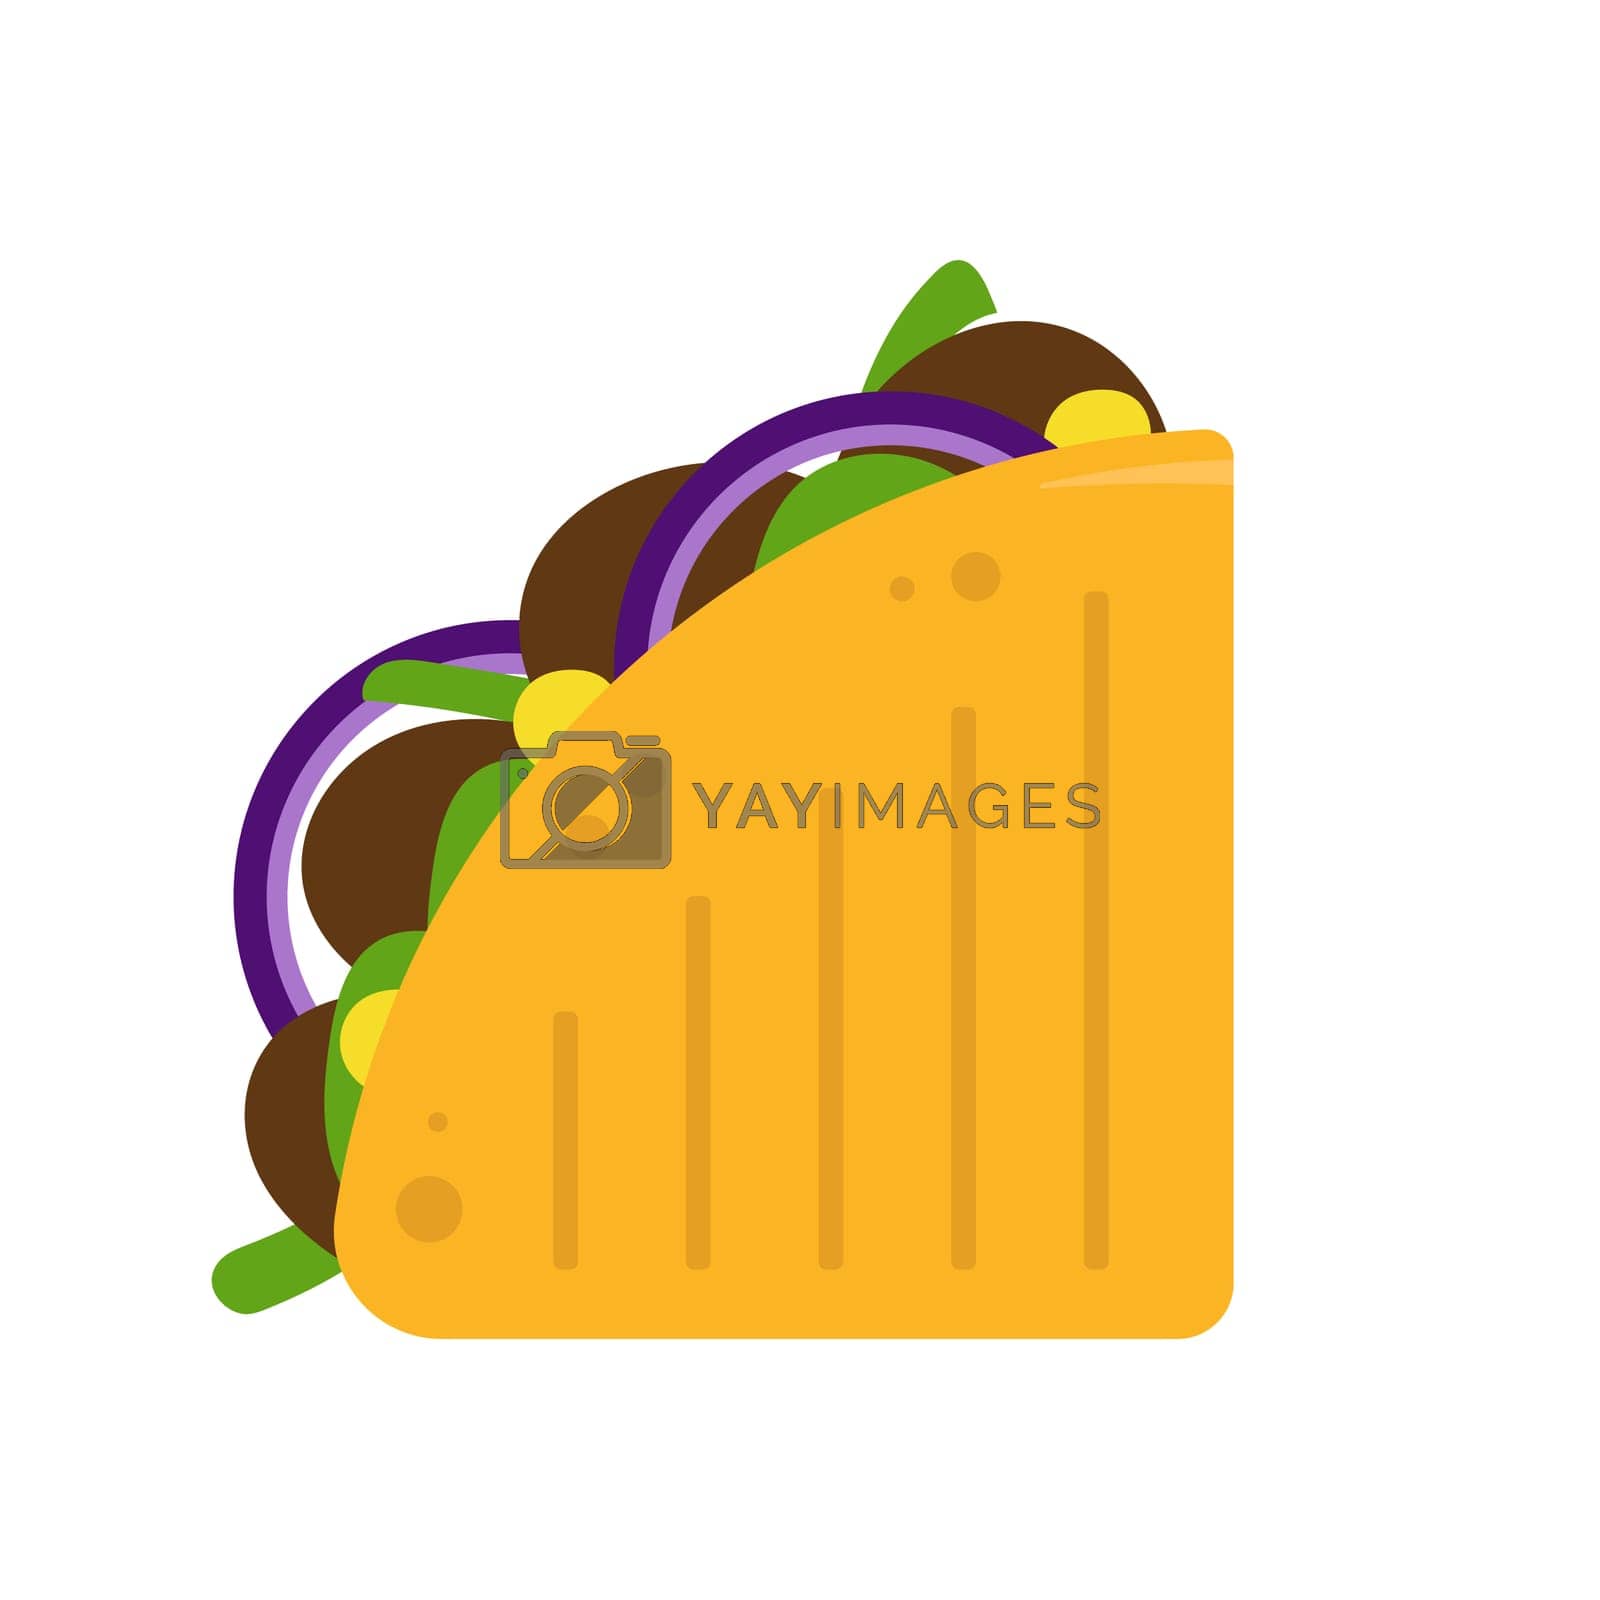 Royalty free image of Cartoon quesadilla with meat and vegetables, vector illustration. by natali_brill